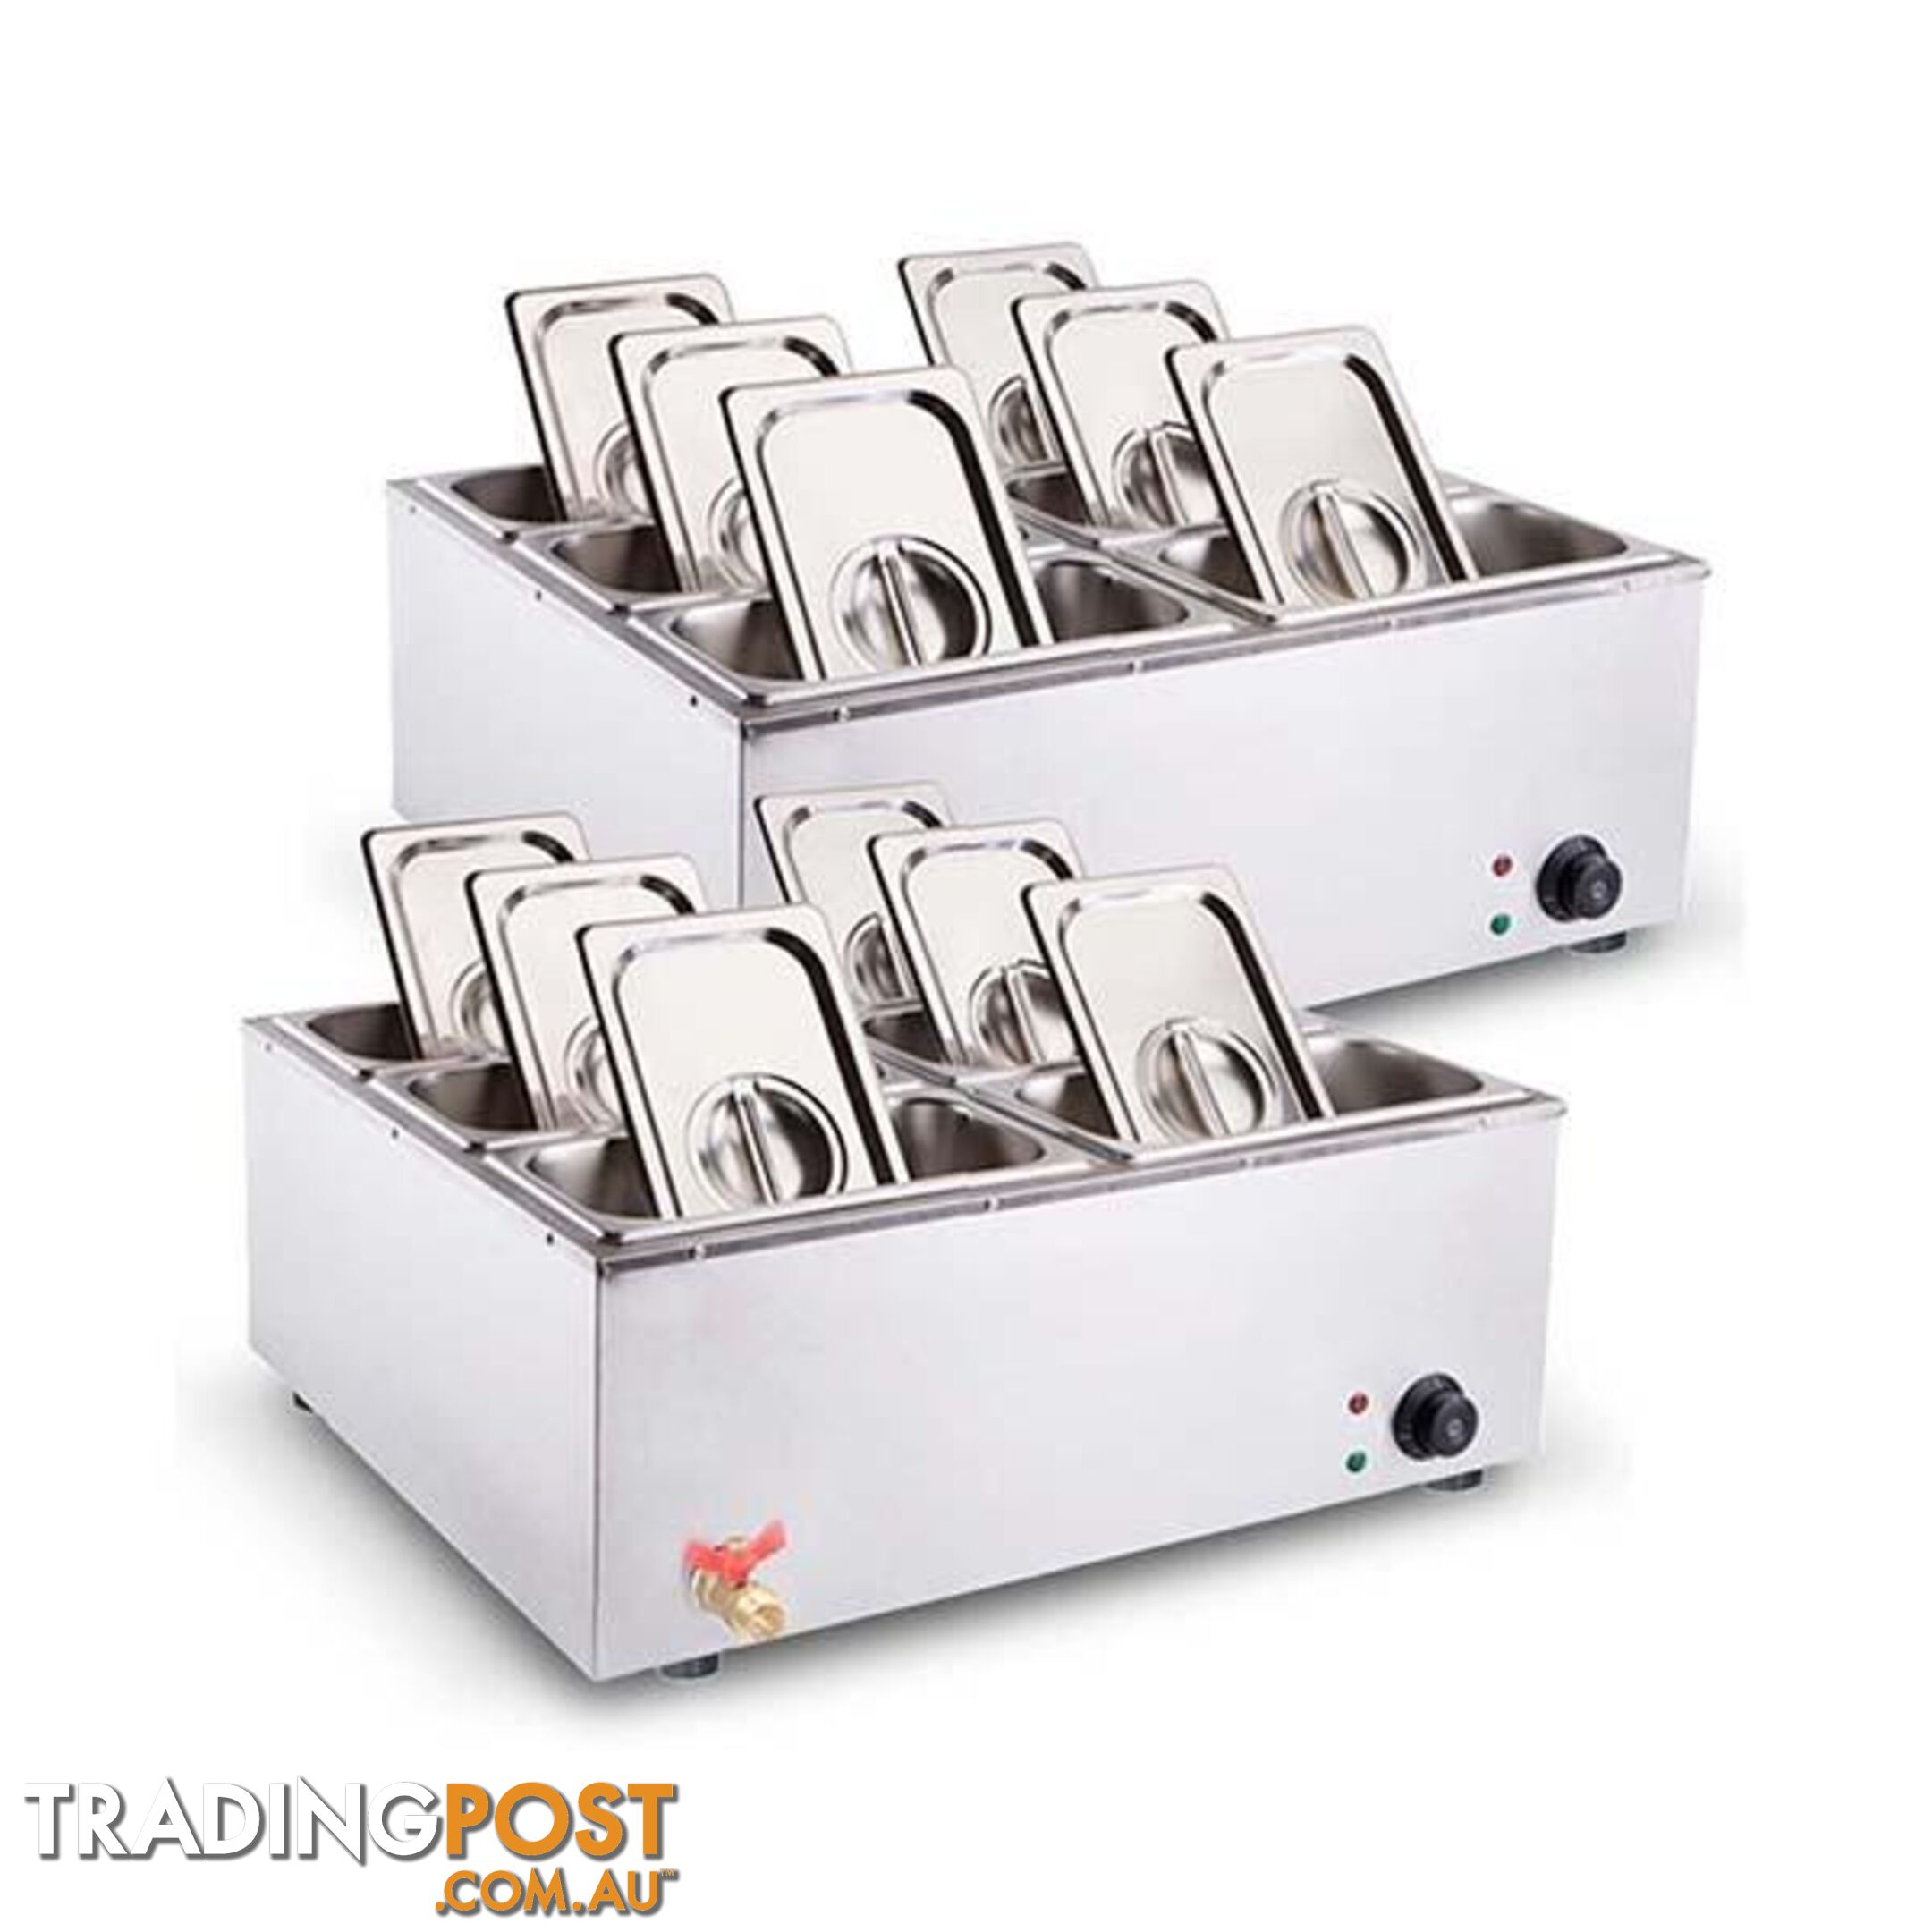 Soga 2X Stainless Steel Electric Food Warmer With Pans And Lids 6X3L - Soga - 9476062092863